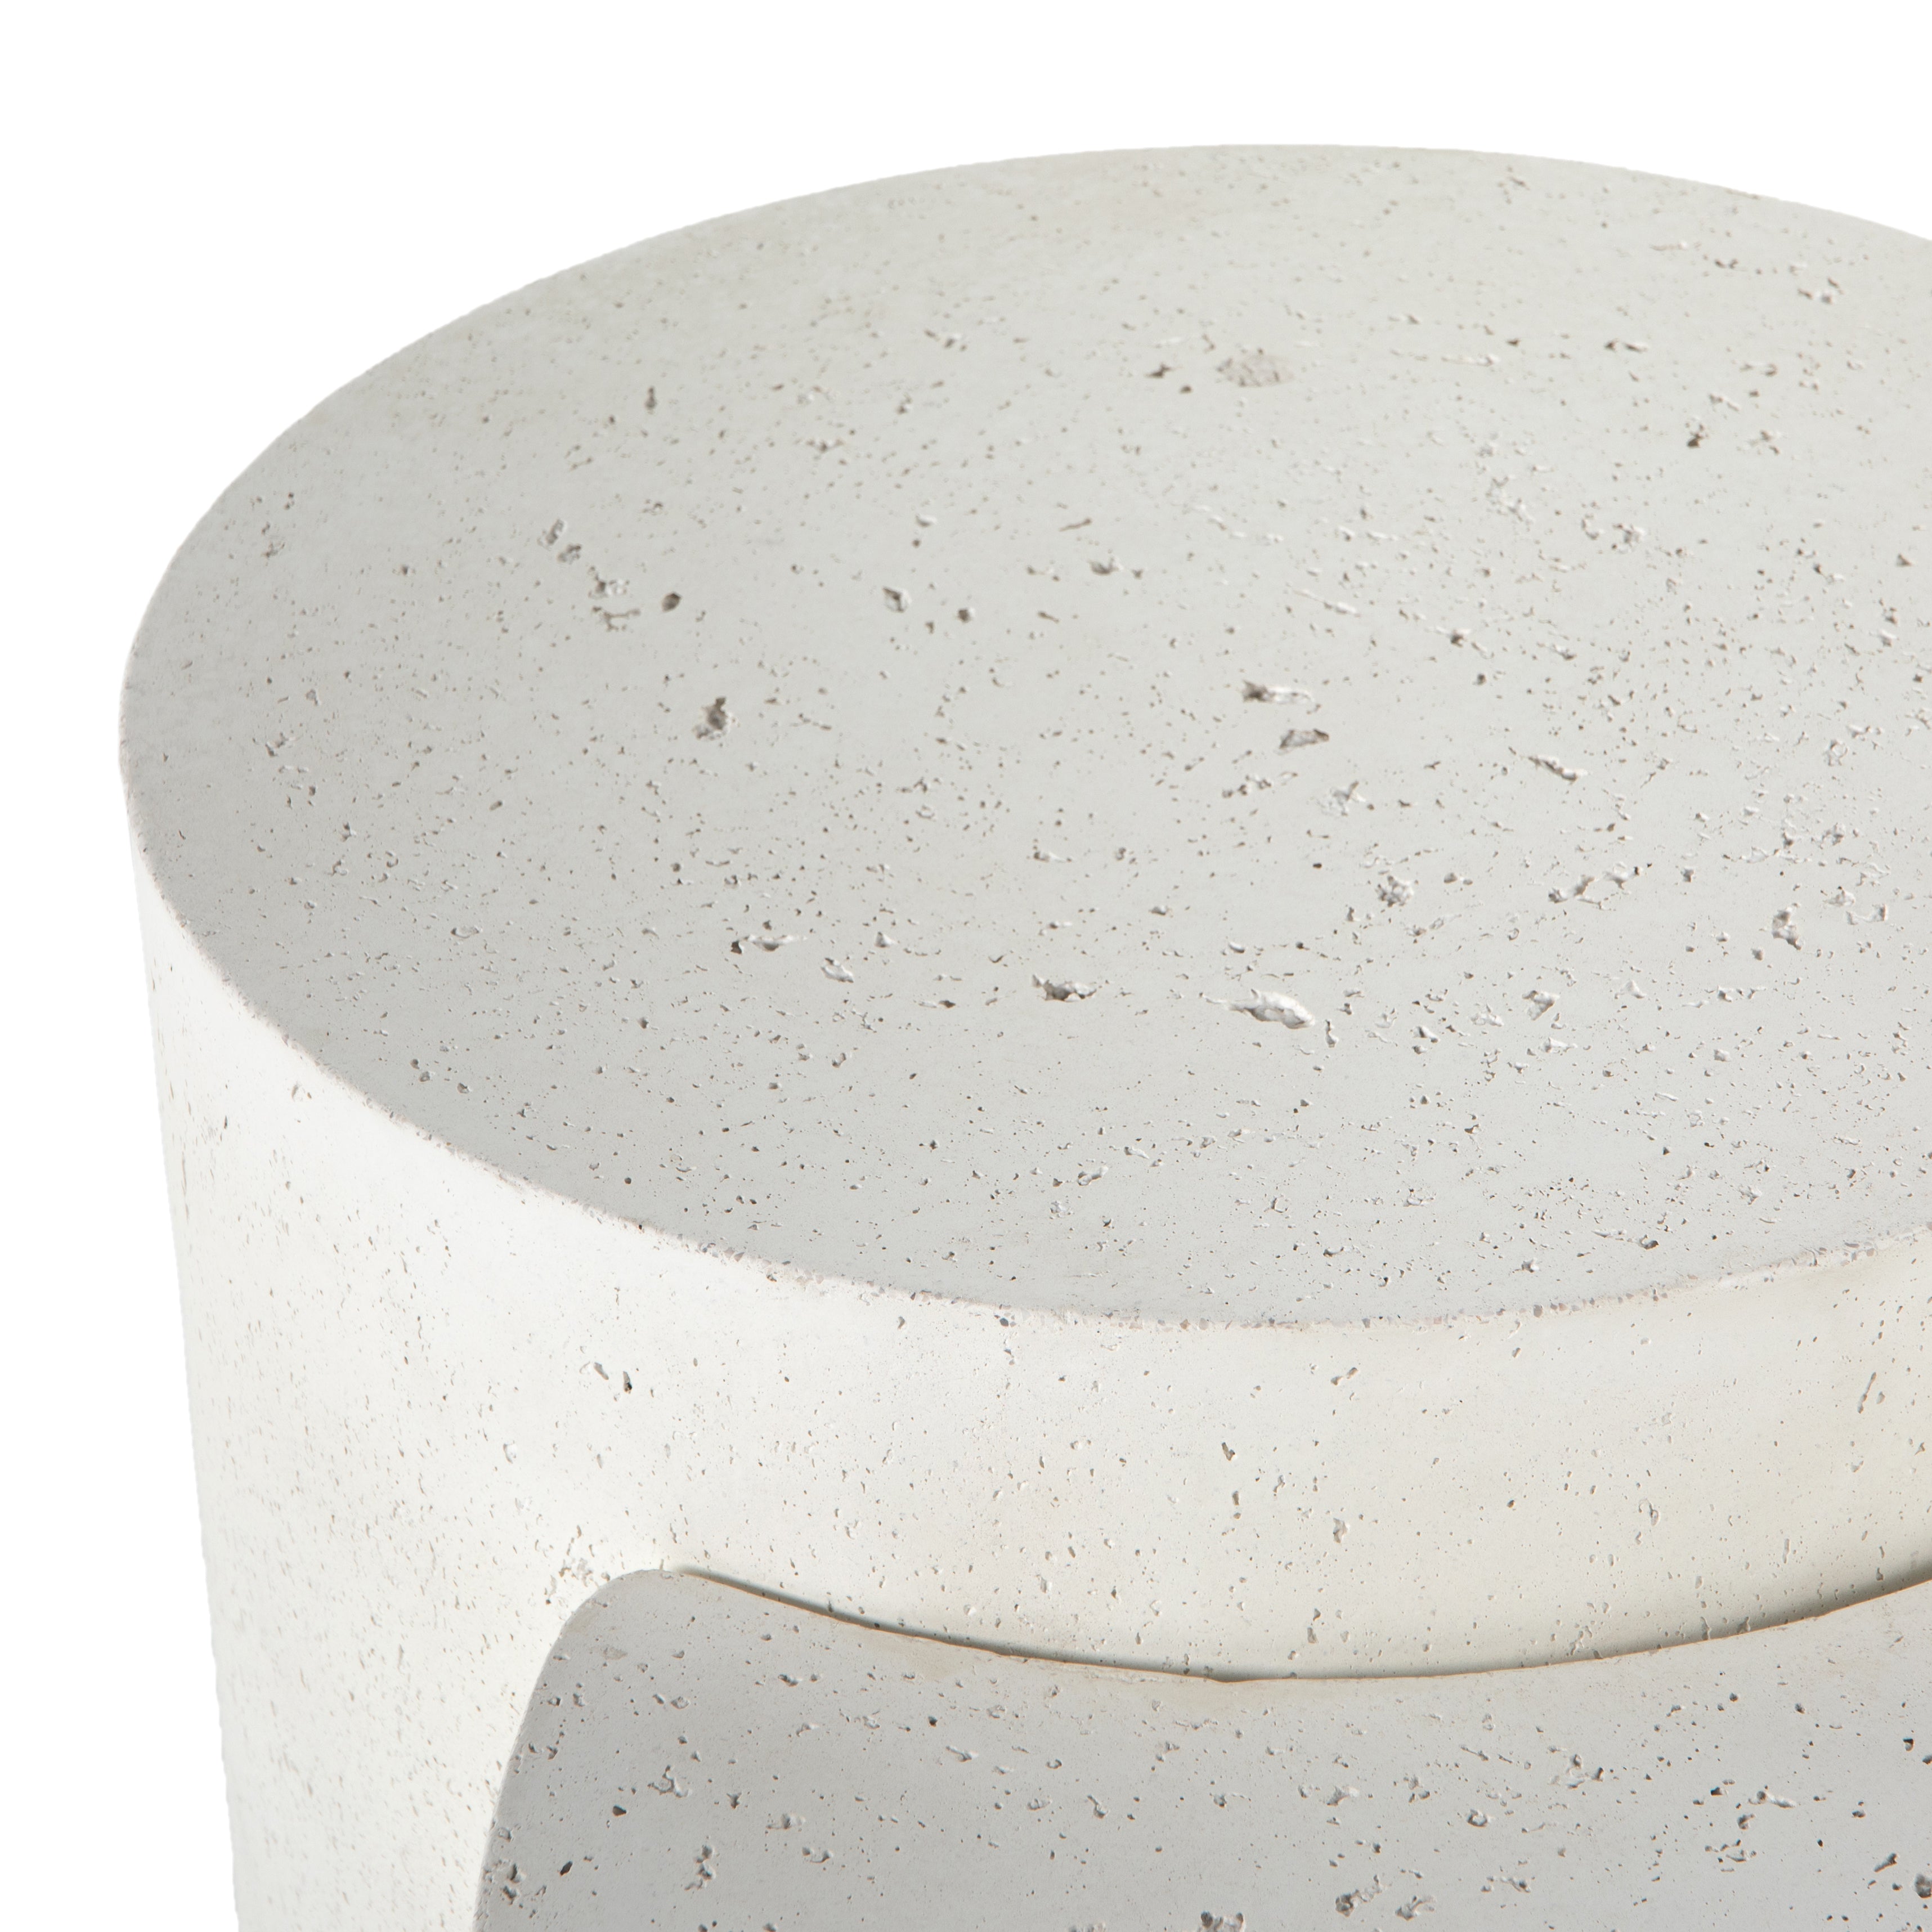 Made from white-finished concrete with deep, textured pitting, this Meza Nesting Coffee Table - Textured White is sturdy and beautiful. Inspired by mid-century coral décor, this nesting coffee table features two tiers for a layered look with modernity.  Overall Dimensions: 43.75"w x 28.25"d x 19.00"h